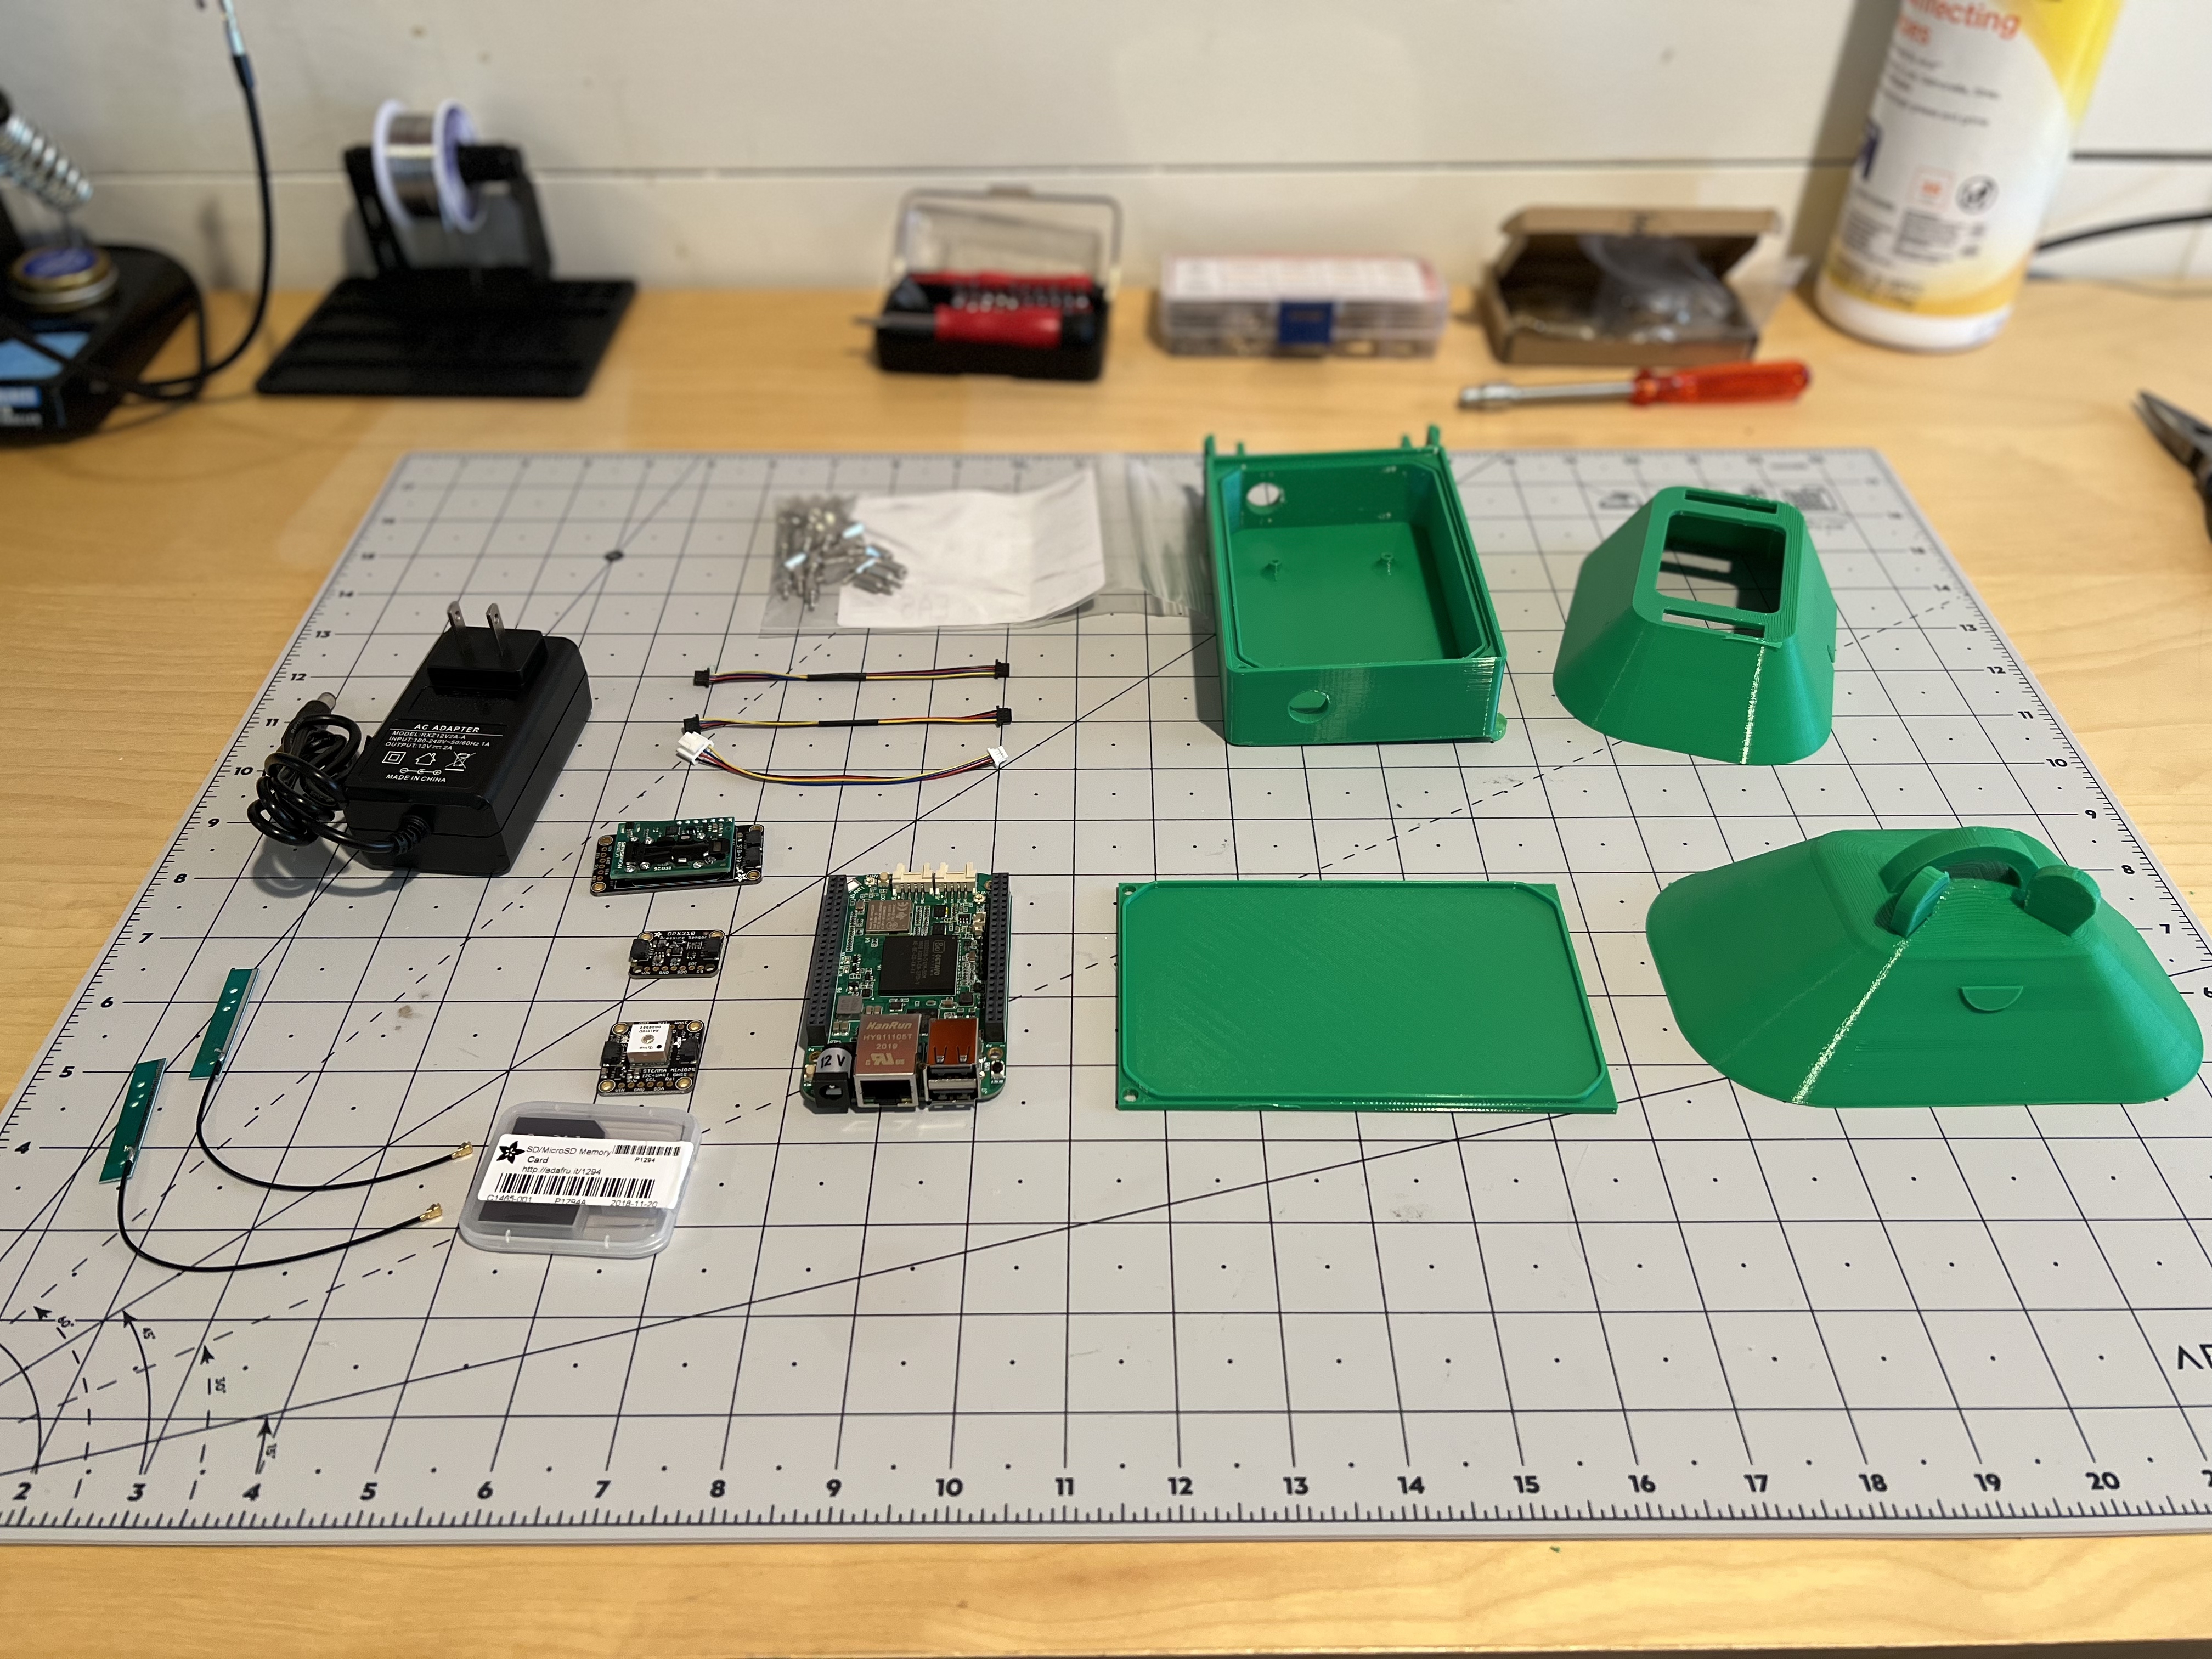 All the parts you need to build a ribbit network sensor